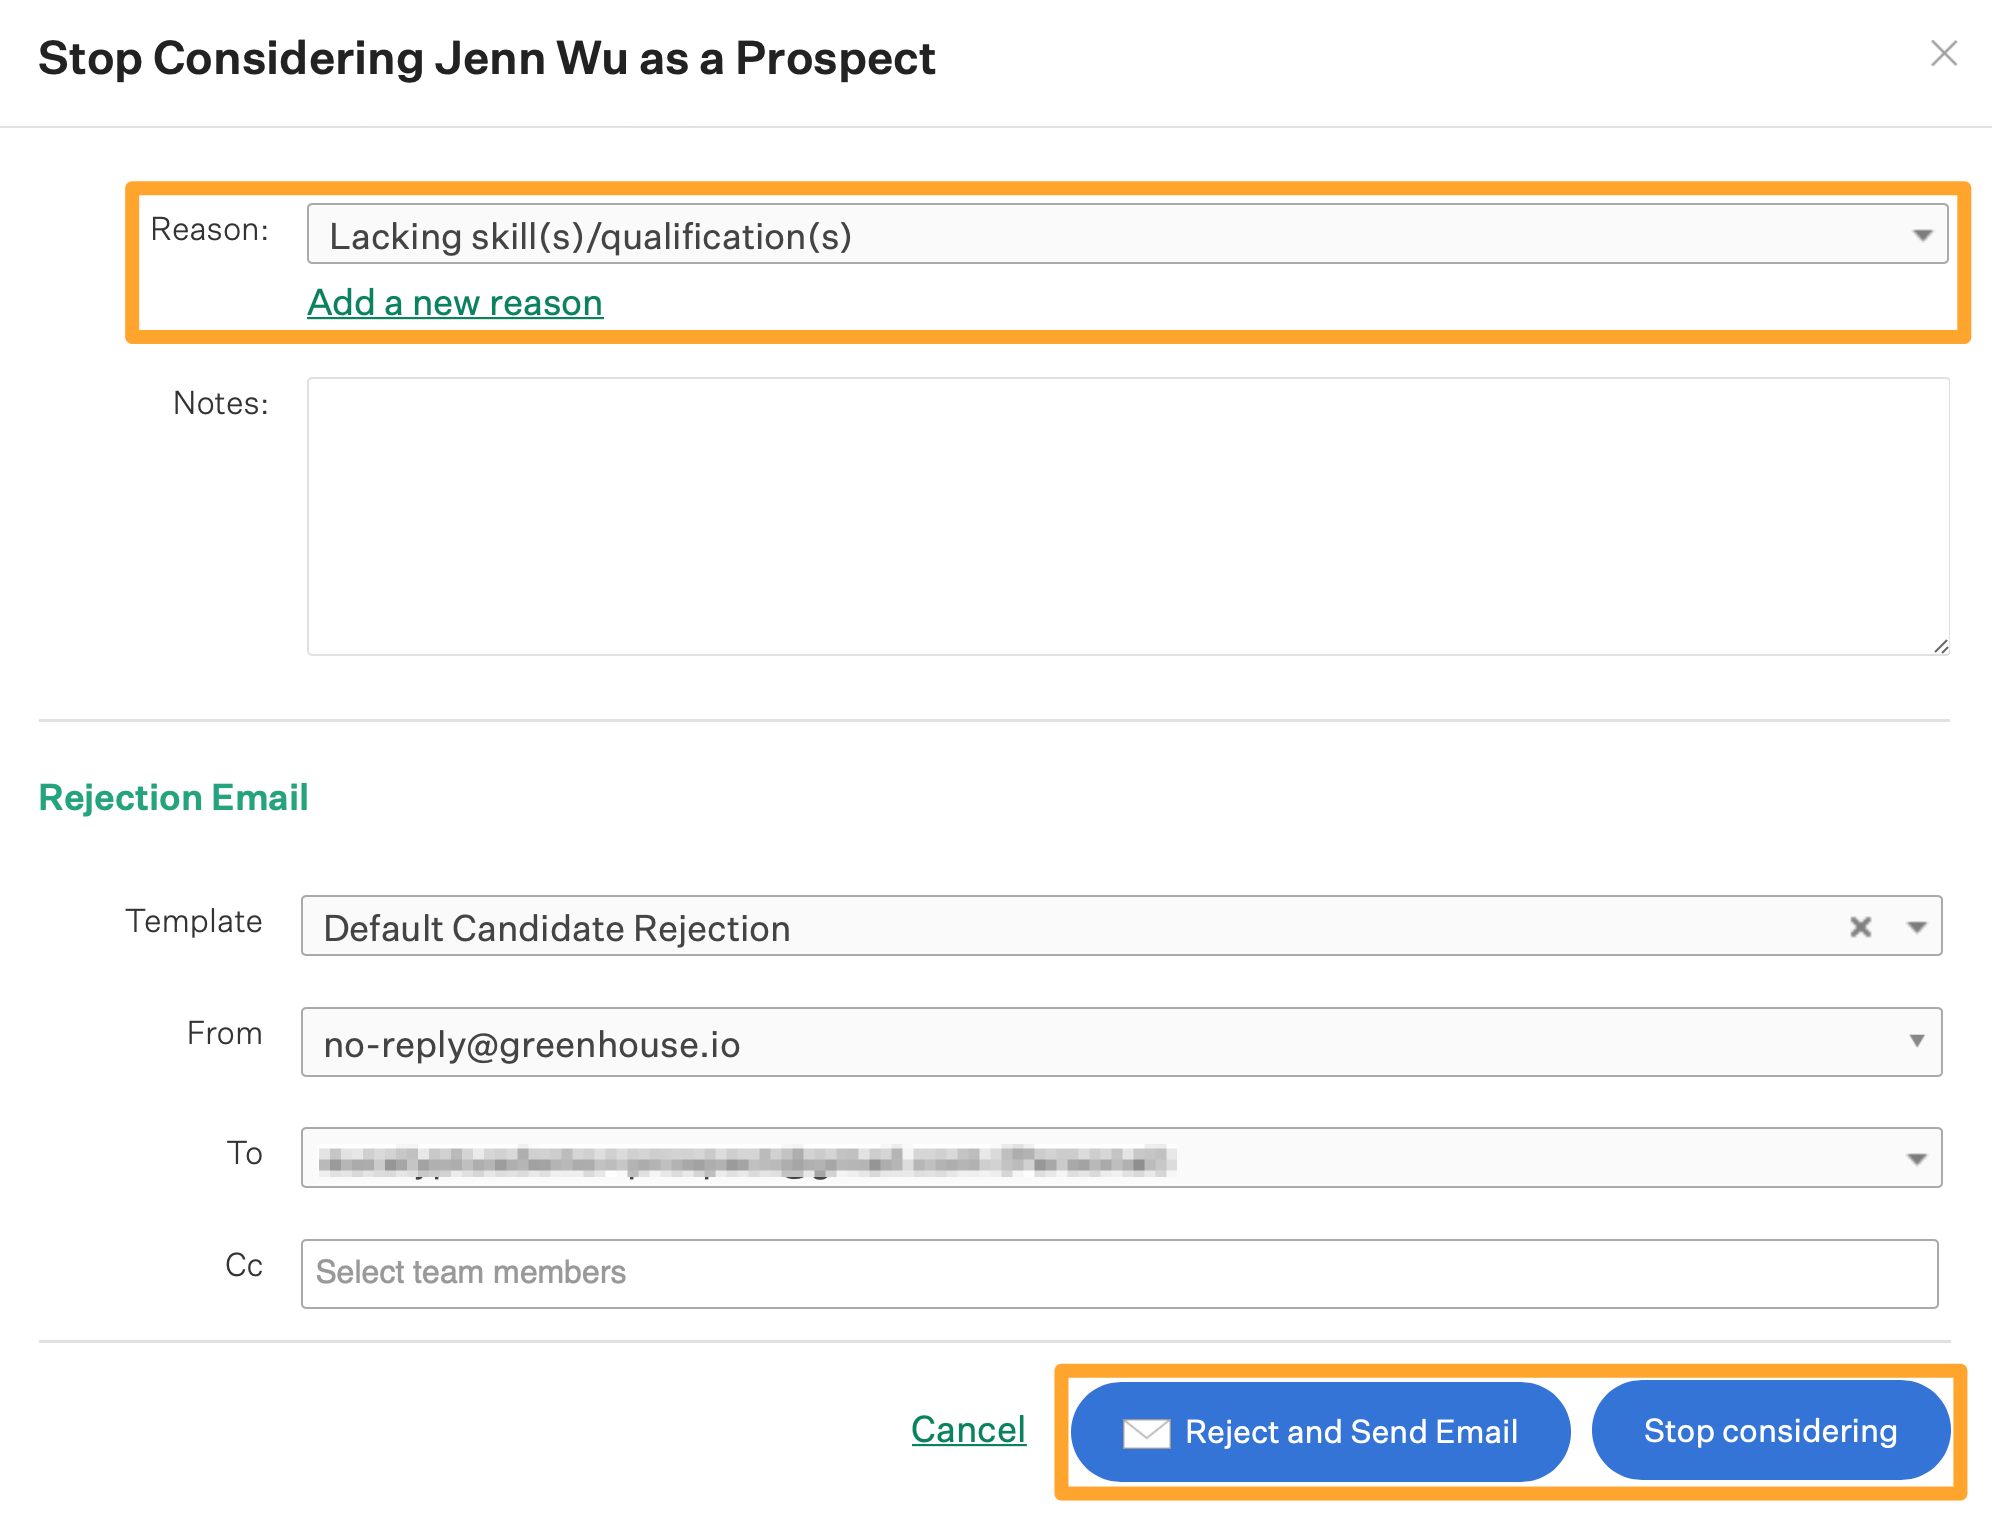 Screenshot of stop considering as a prospect prompt